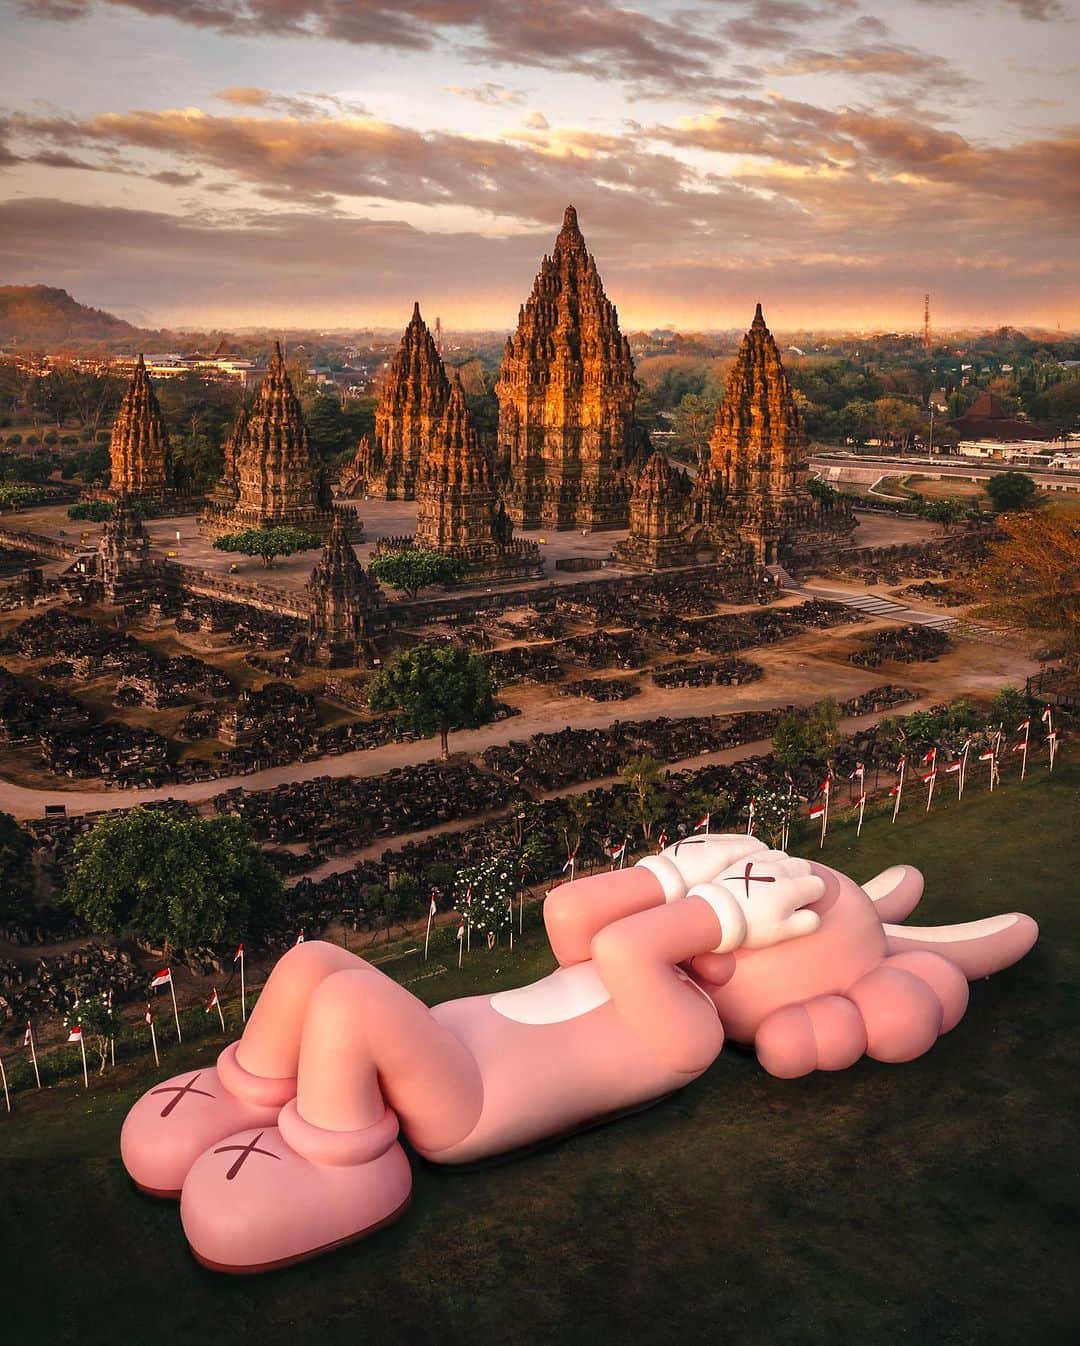 R̸K̸のインスタグラム：「KAWS:HOLIDAY INDONESIA ・ from sunrise to sunset ・ @KAWS @ARR.AllRightsReserved @DDTStore @akg.entertainment #KAWS #KAWSHOLIDAY #AllRightsReserved #DDTStore #AKGEntertainment ・ #beautifuldestinations #earthfocus #earthbestshots #earthoffcial #earthpix #thegreatplanet #discoverearth #awesome_photographers #designboom #voyaged #travellingthroughtheworld #streets_vision #complexphotos #d_signers #lonelyplanet #modernArchitect #architectanddesign #architecture_hunter #artsytecture #amazingarchitecture #fromwhereidrone #nightphotography #lovetheworld  @lightroom @soul.planet @earthfever @9gag @paradise @natgeotravel @awesome.earth @national_archaeology」